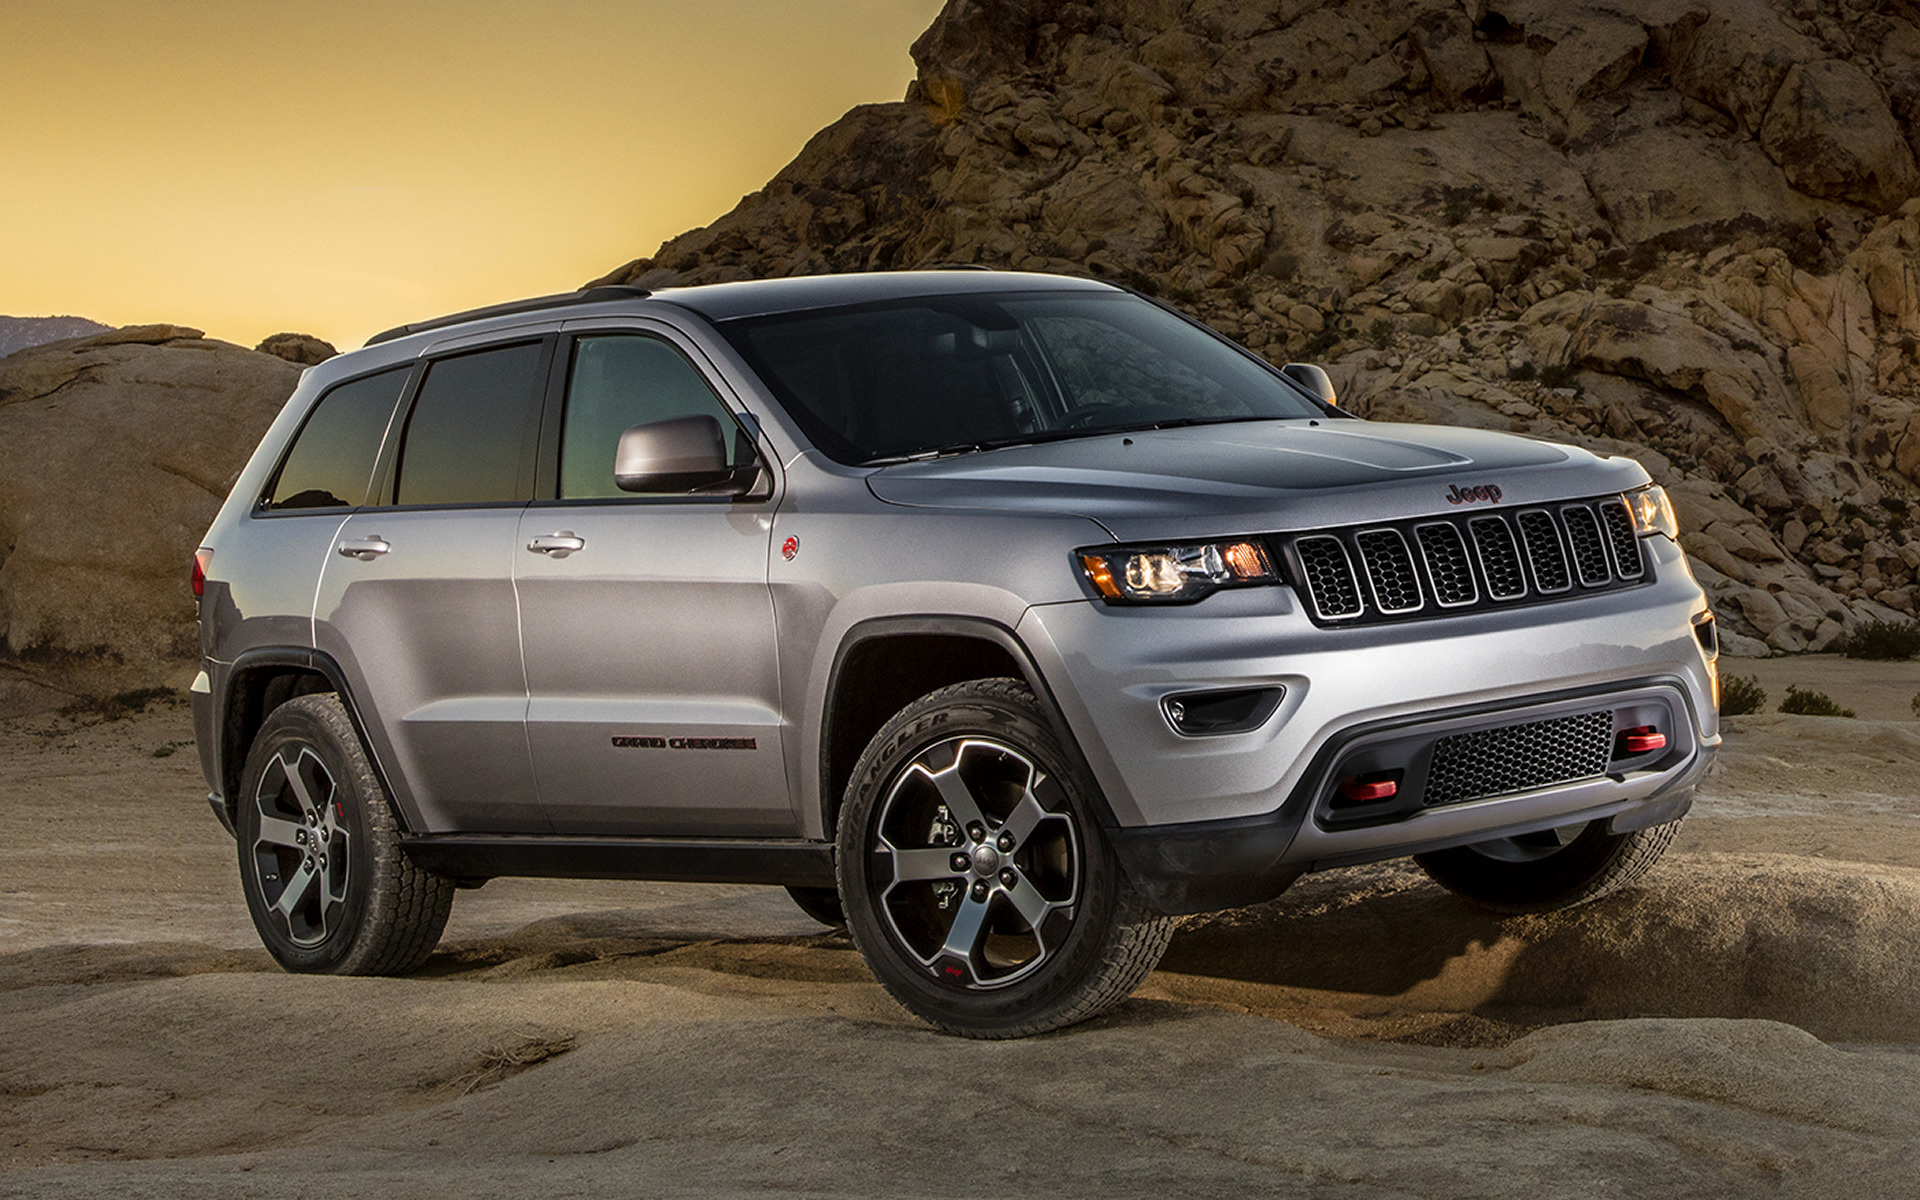 2017 Jeep Grand Cherokee Trailhawk - Wallpapers and HD Images | Car Pixel